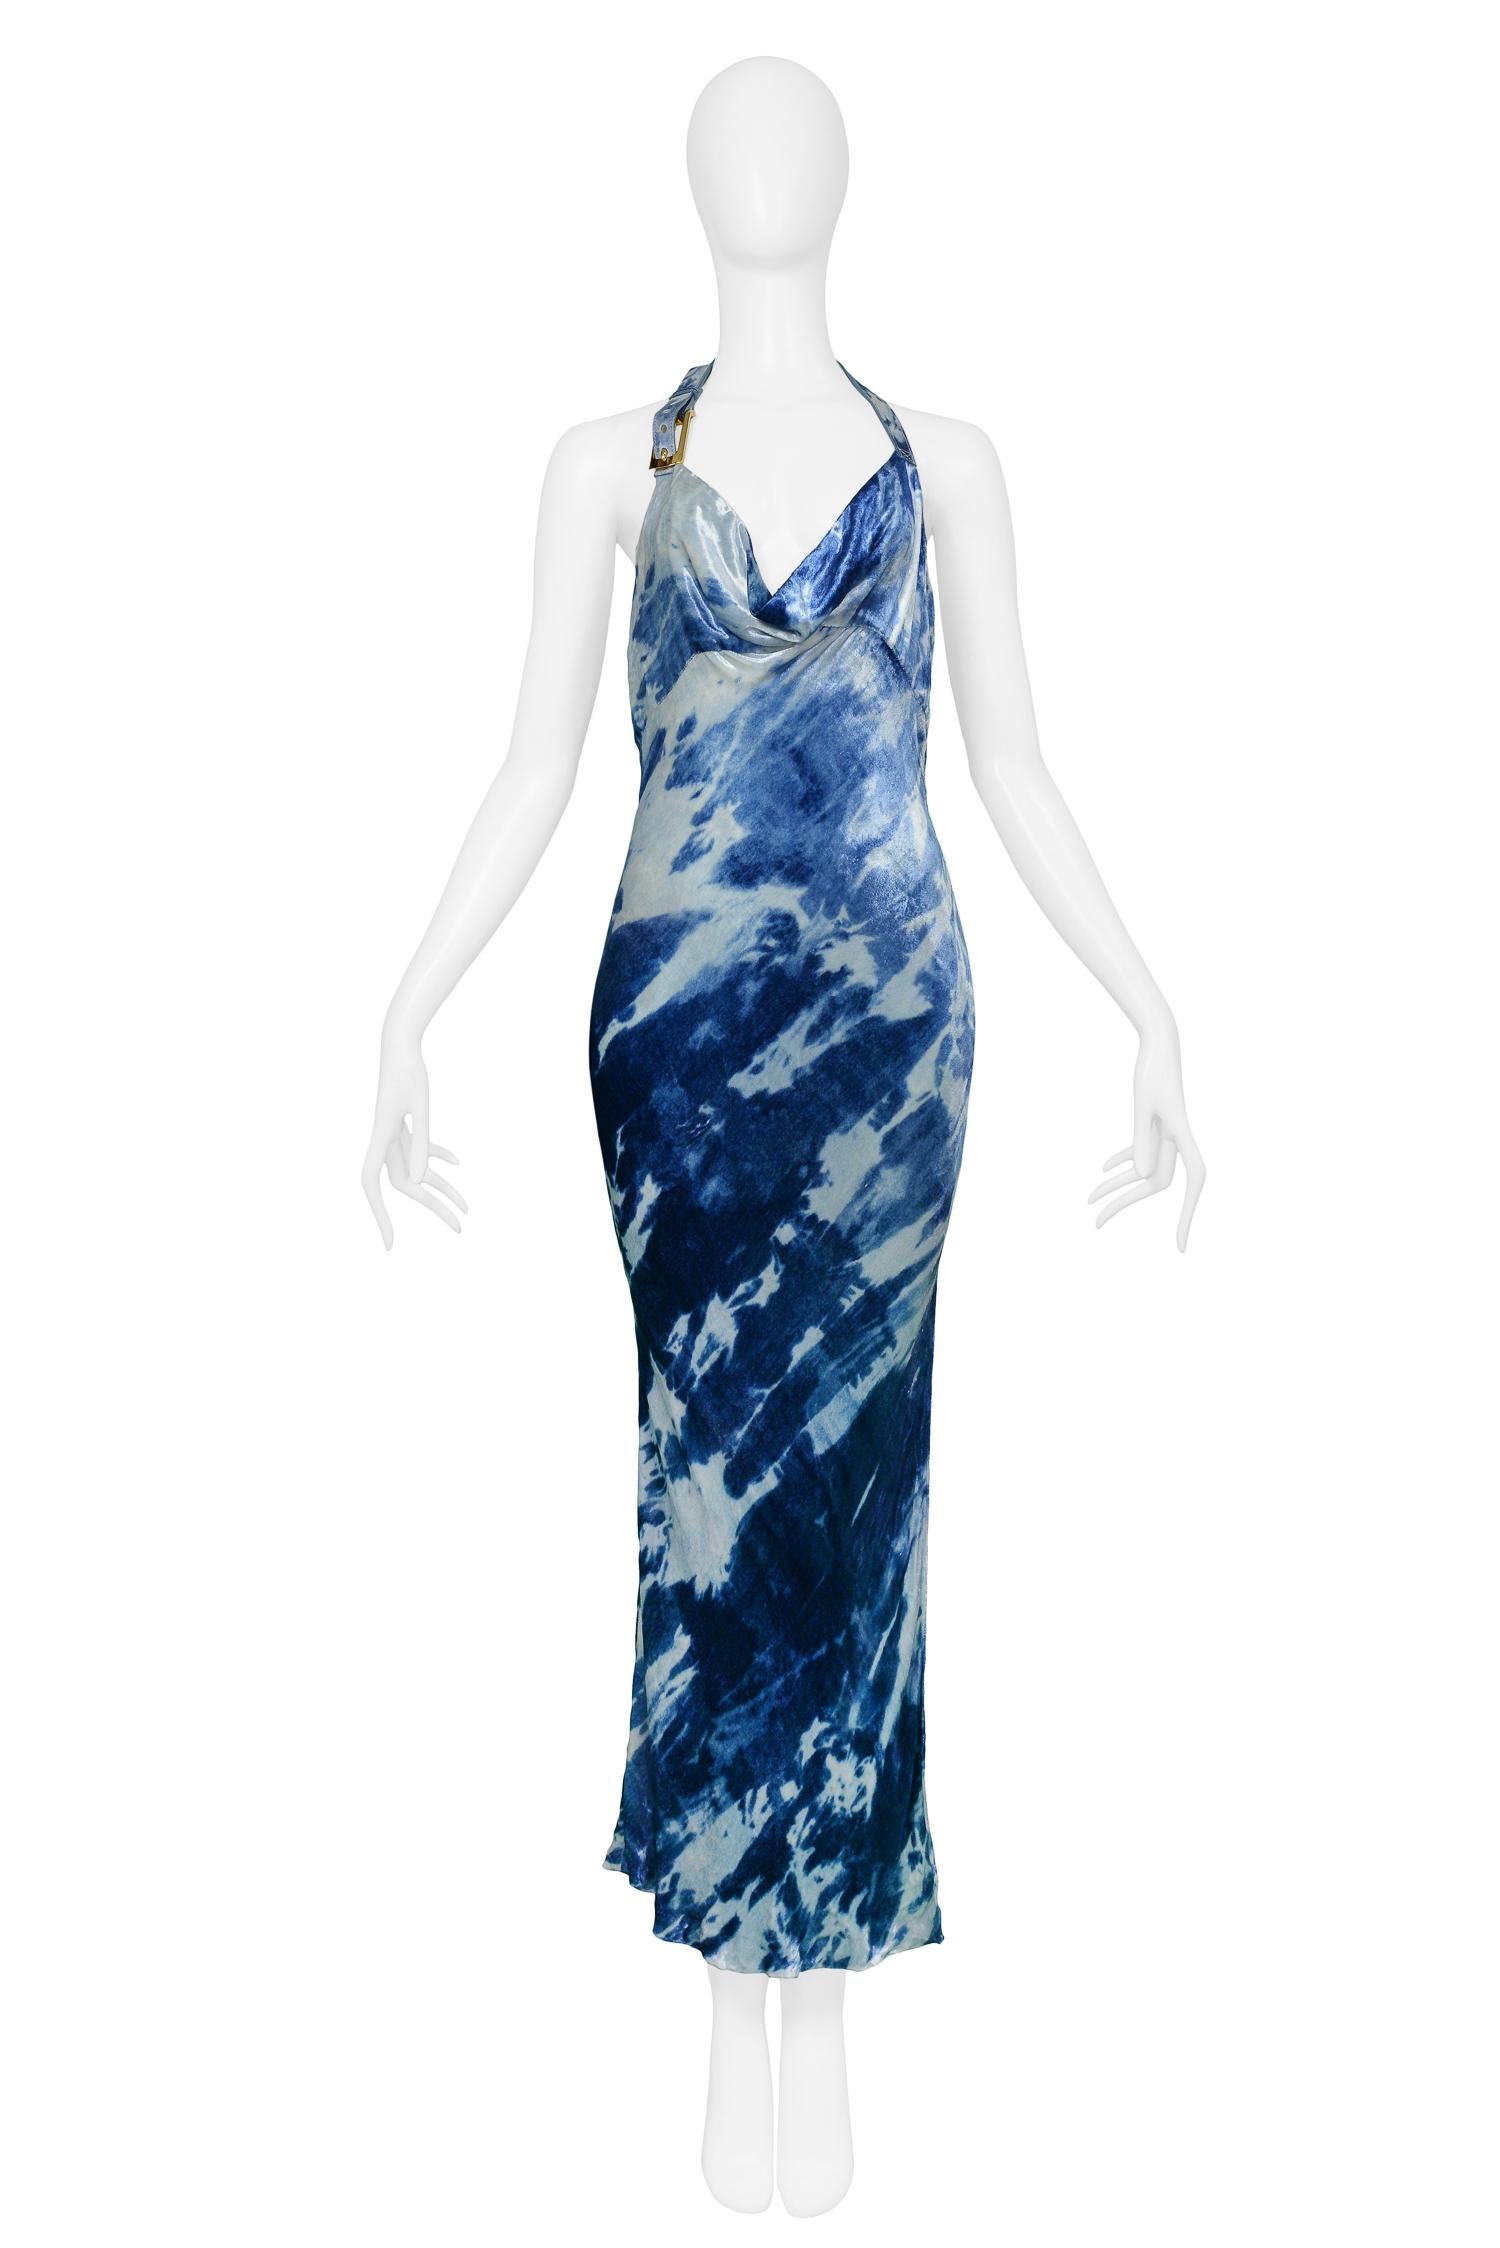 John Galliano for Christian Dior blue & white velvet bias-cut halter gown featuring an open back, draped neckline, side slit, and halter straps adorned with belt buckle detail. From the 2001 Collection.

Excellent Condition.

Size: 38